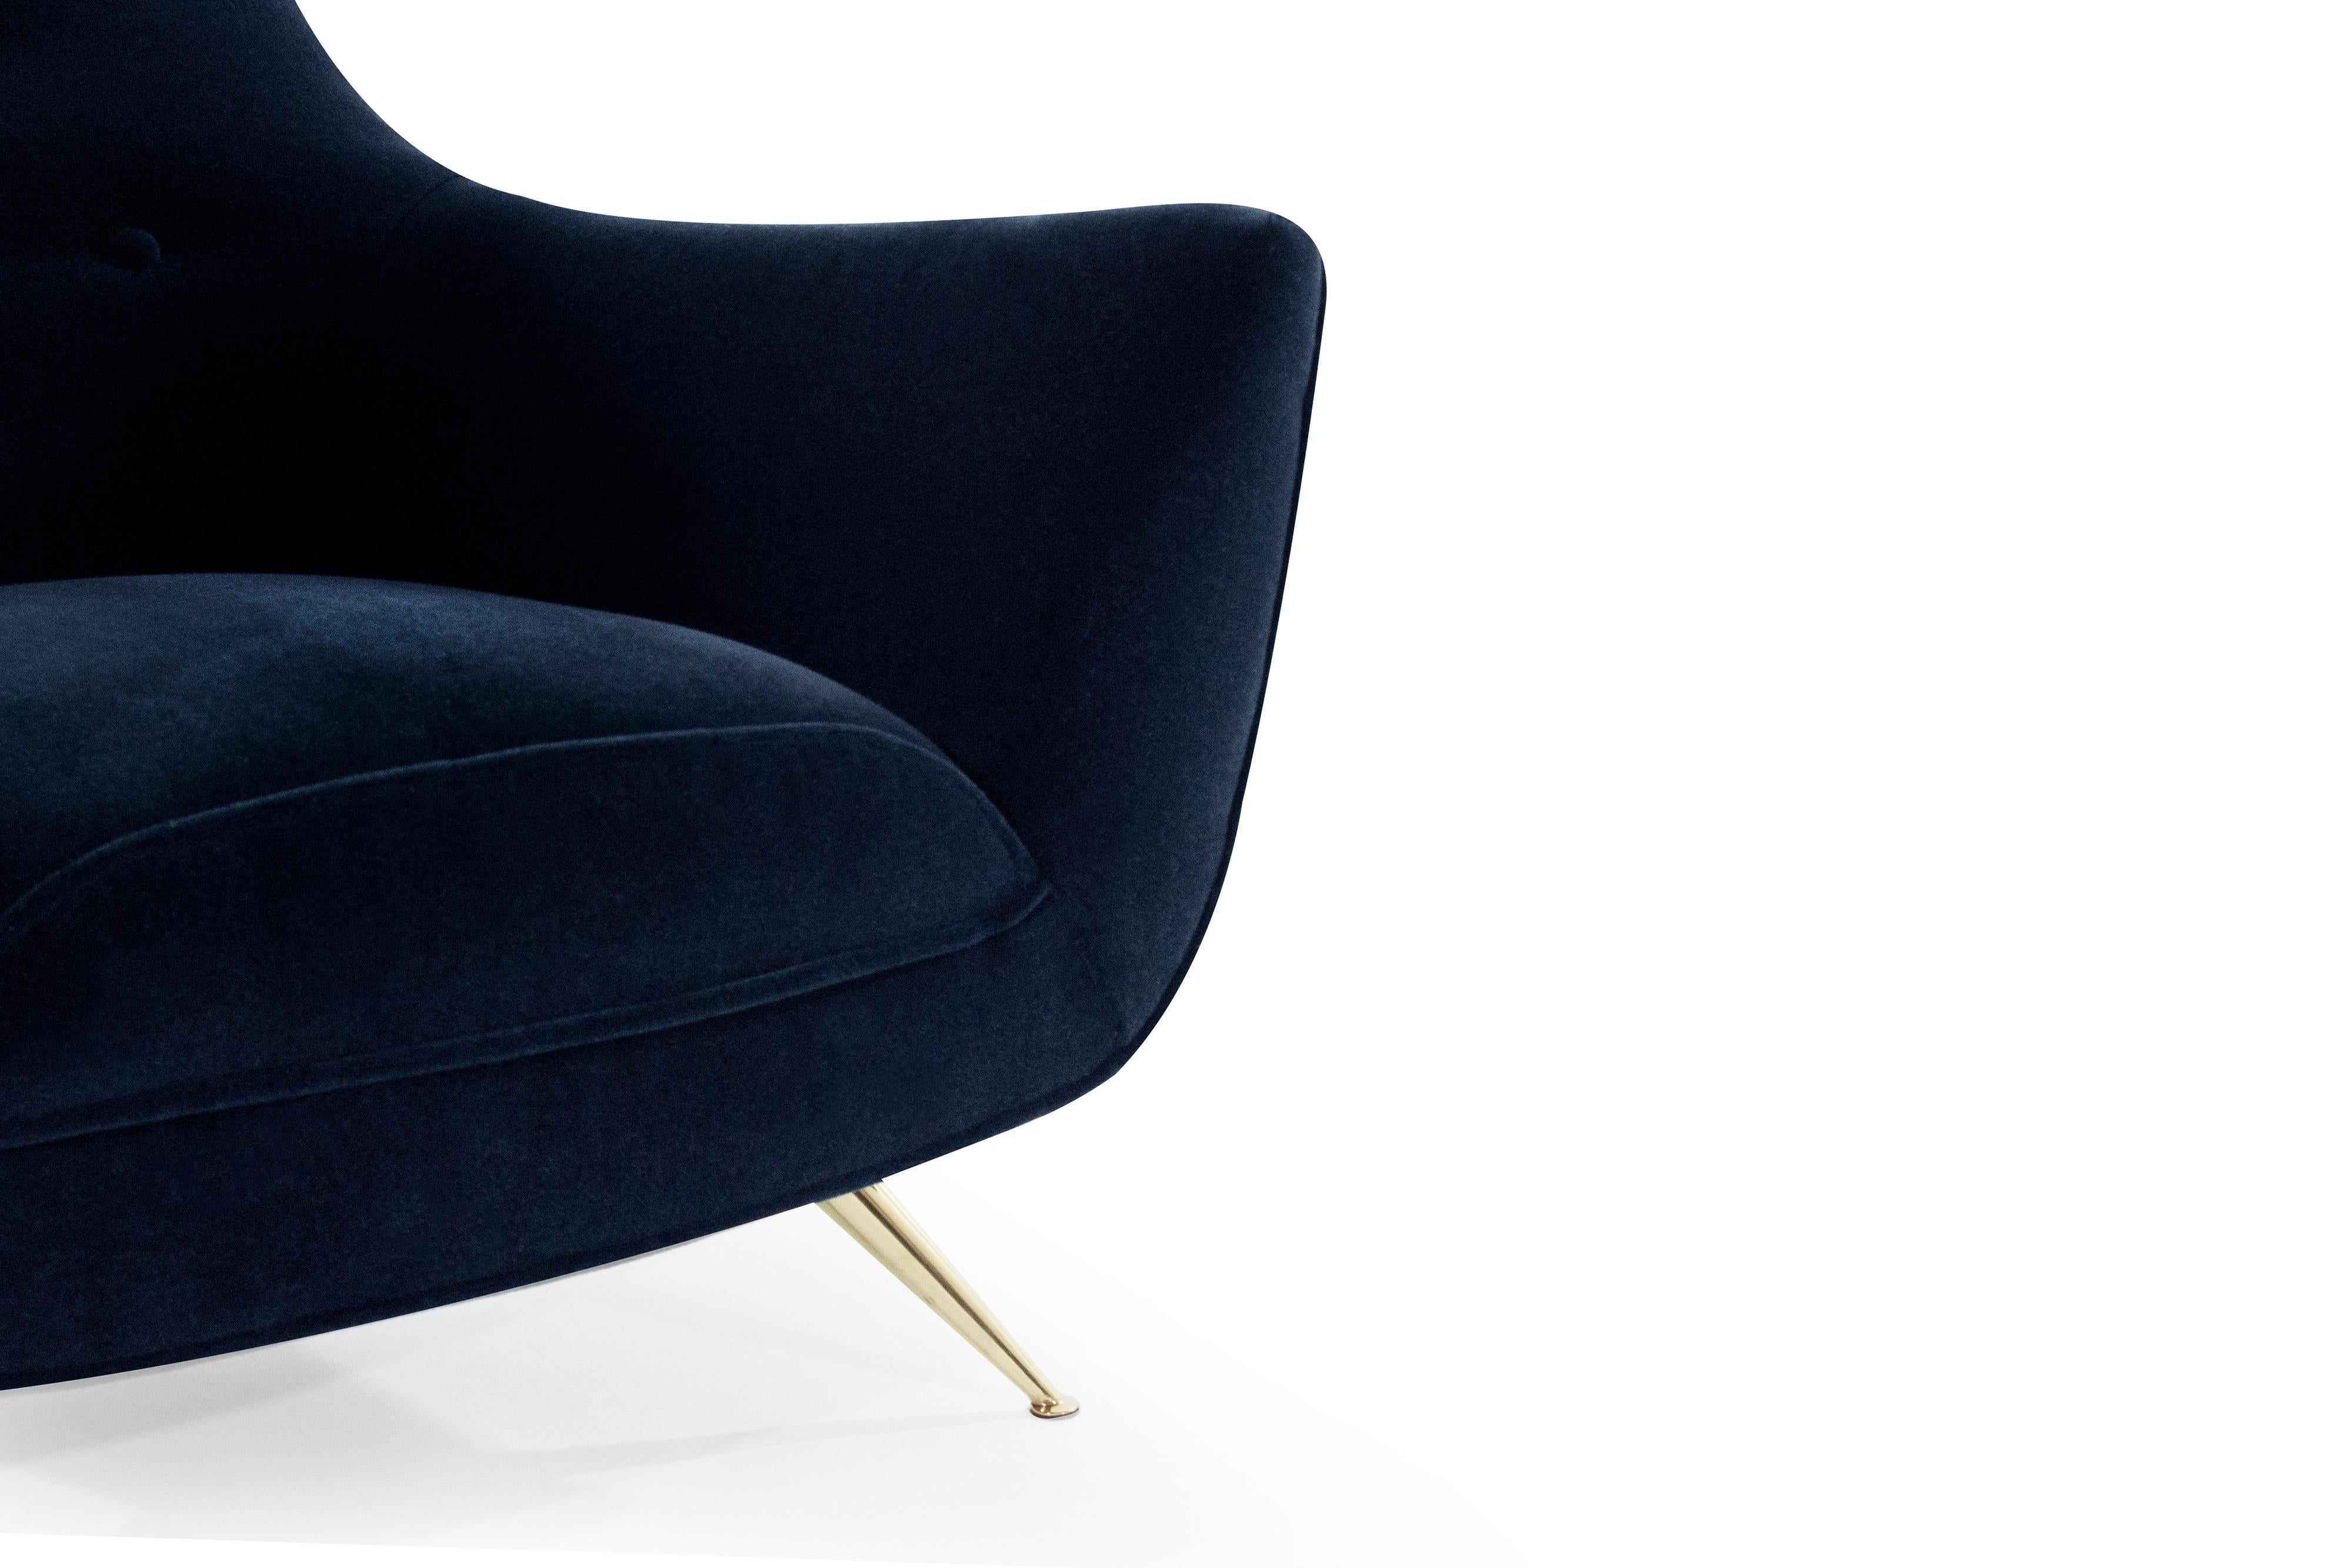 Brass Mid-Century Modern Henry Glass Lounge Chairs in Navy Mohair